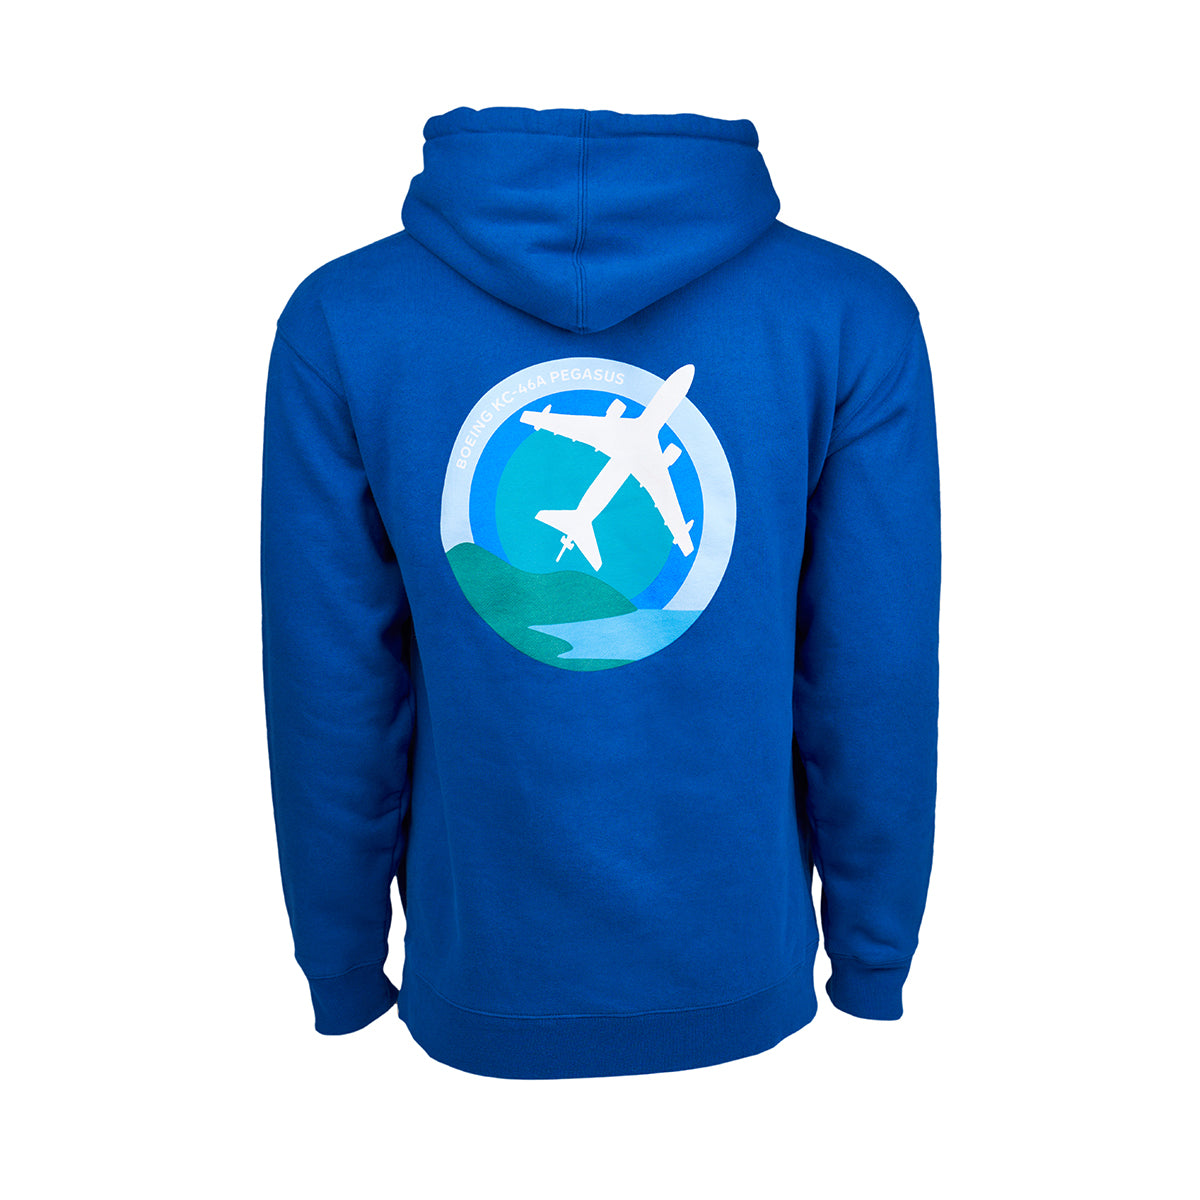 Full product image of the back side of the hooded sweatshirt in a royal blue color.  Showing the Skyward graphic of the Boeing KC-46 Pegasus.